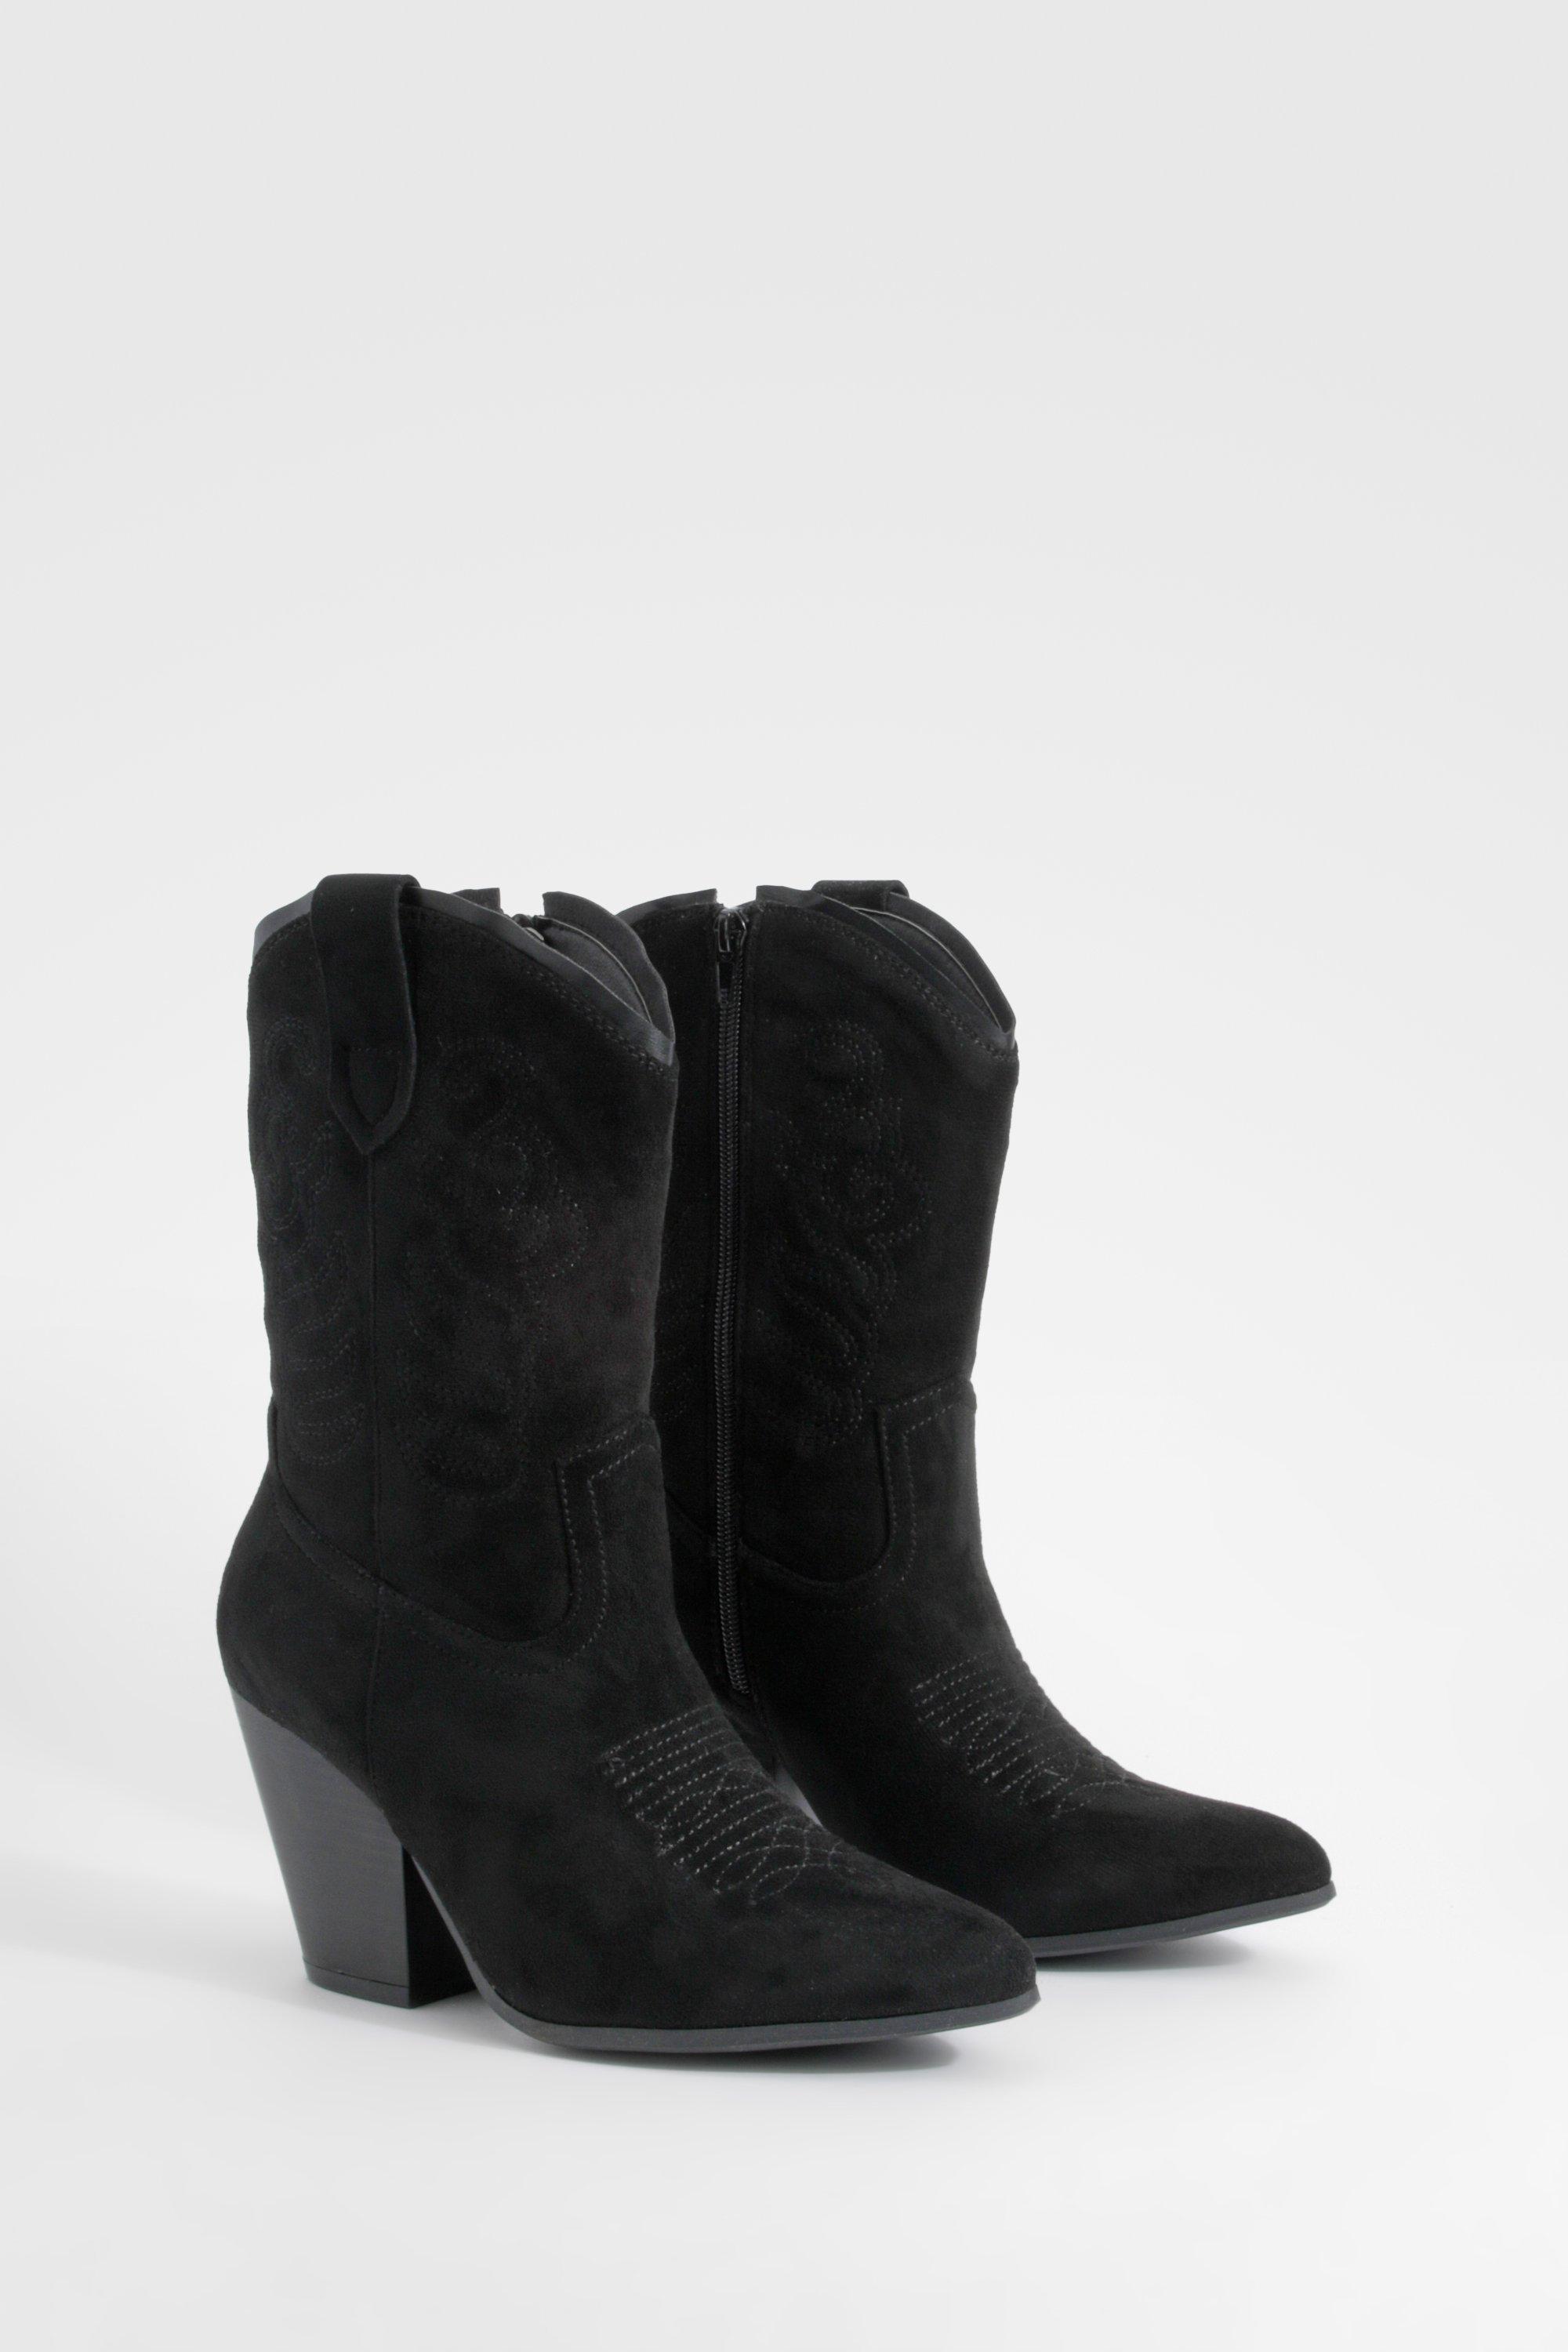 Image of Tab Detail Calf High Western Cowboy Boots, Nero